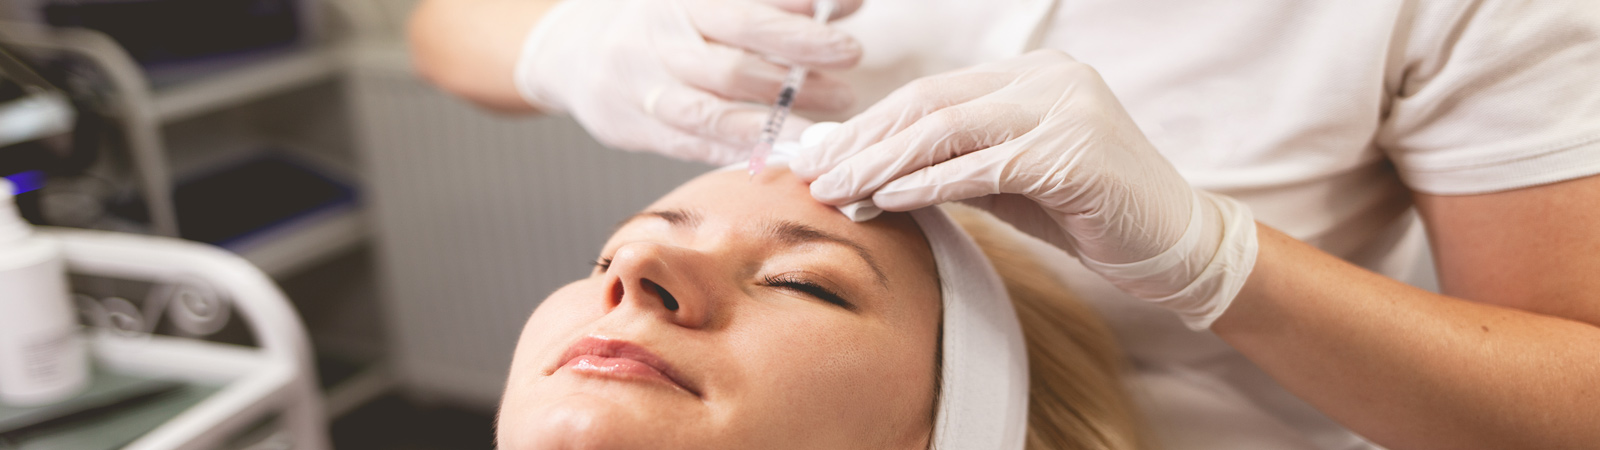 Baby Botox: What It Is